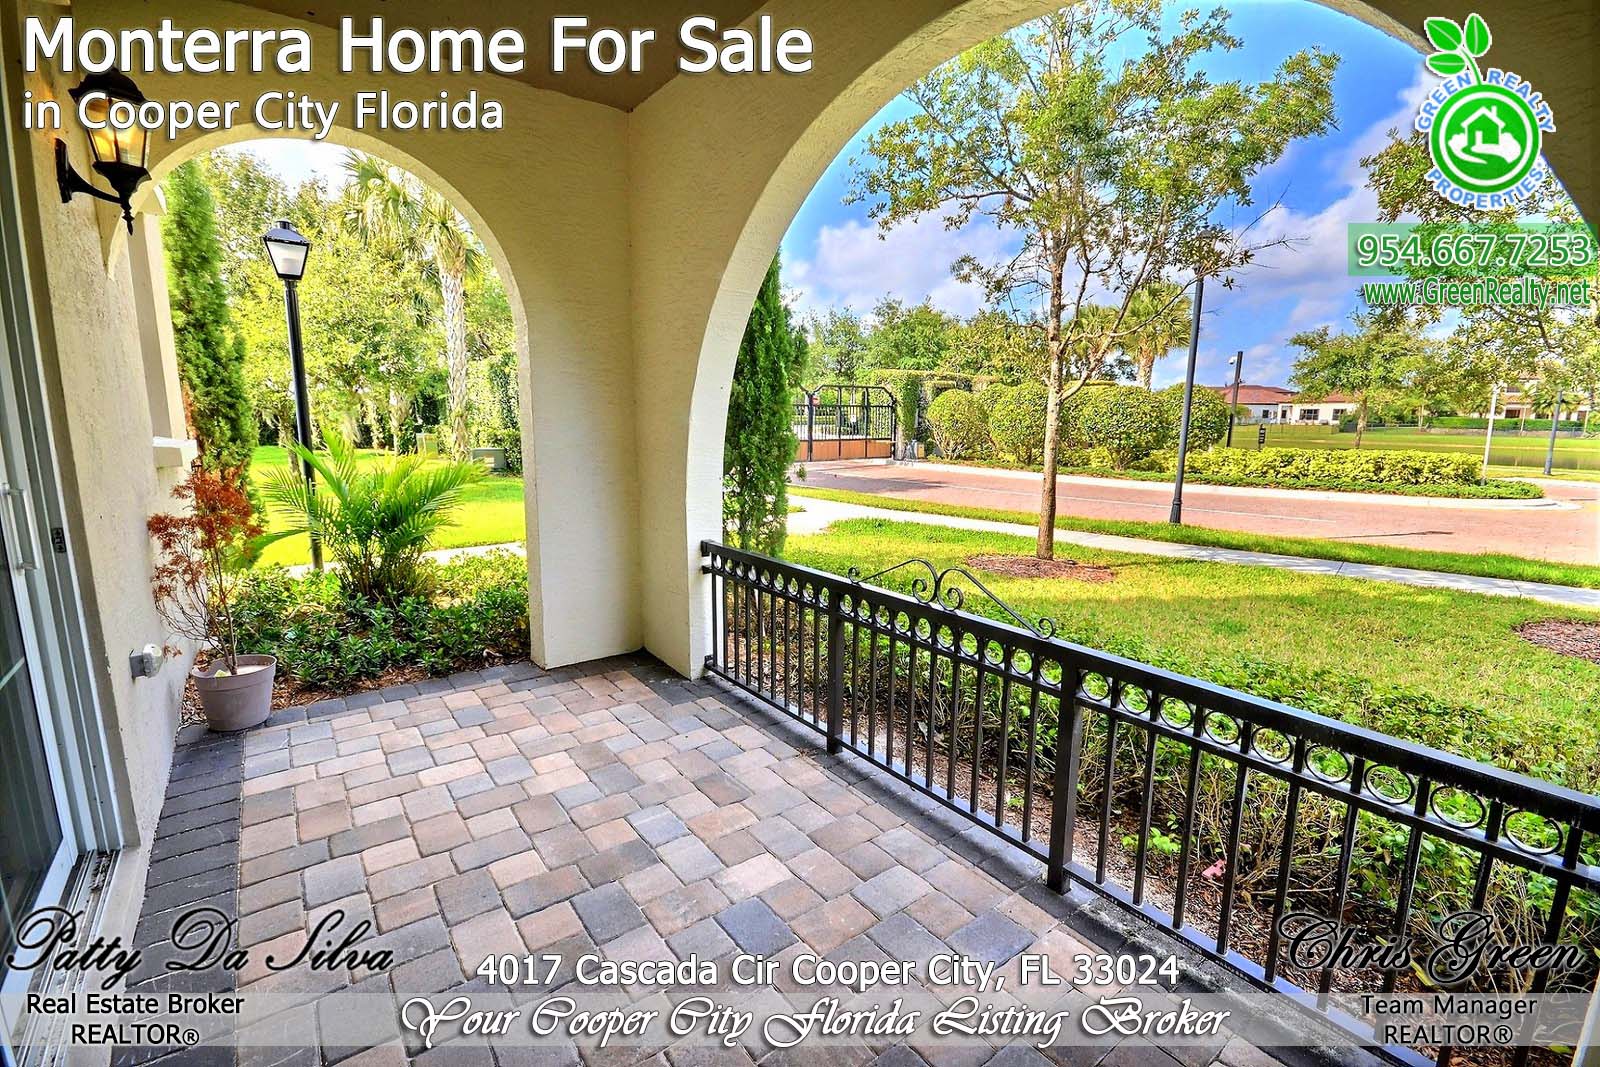 11 gated communities in cooper city